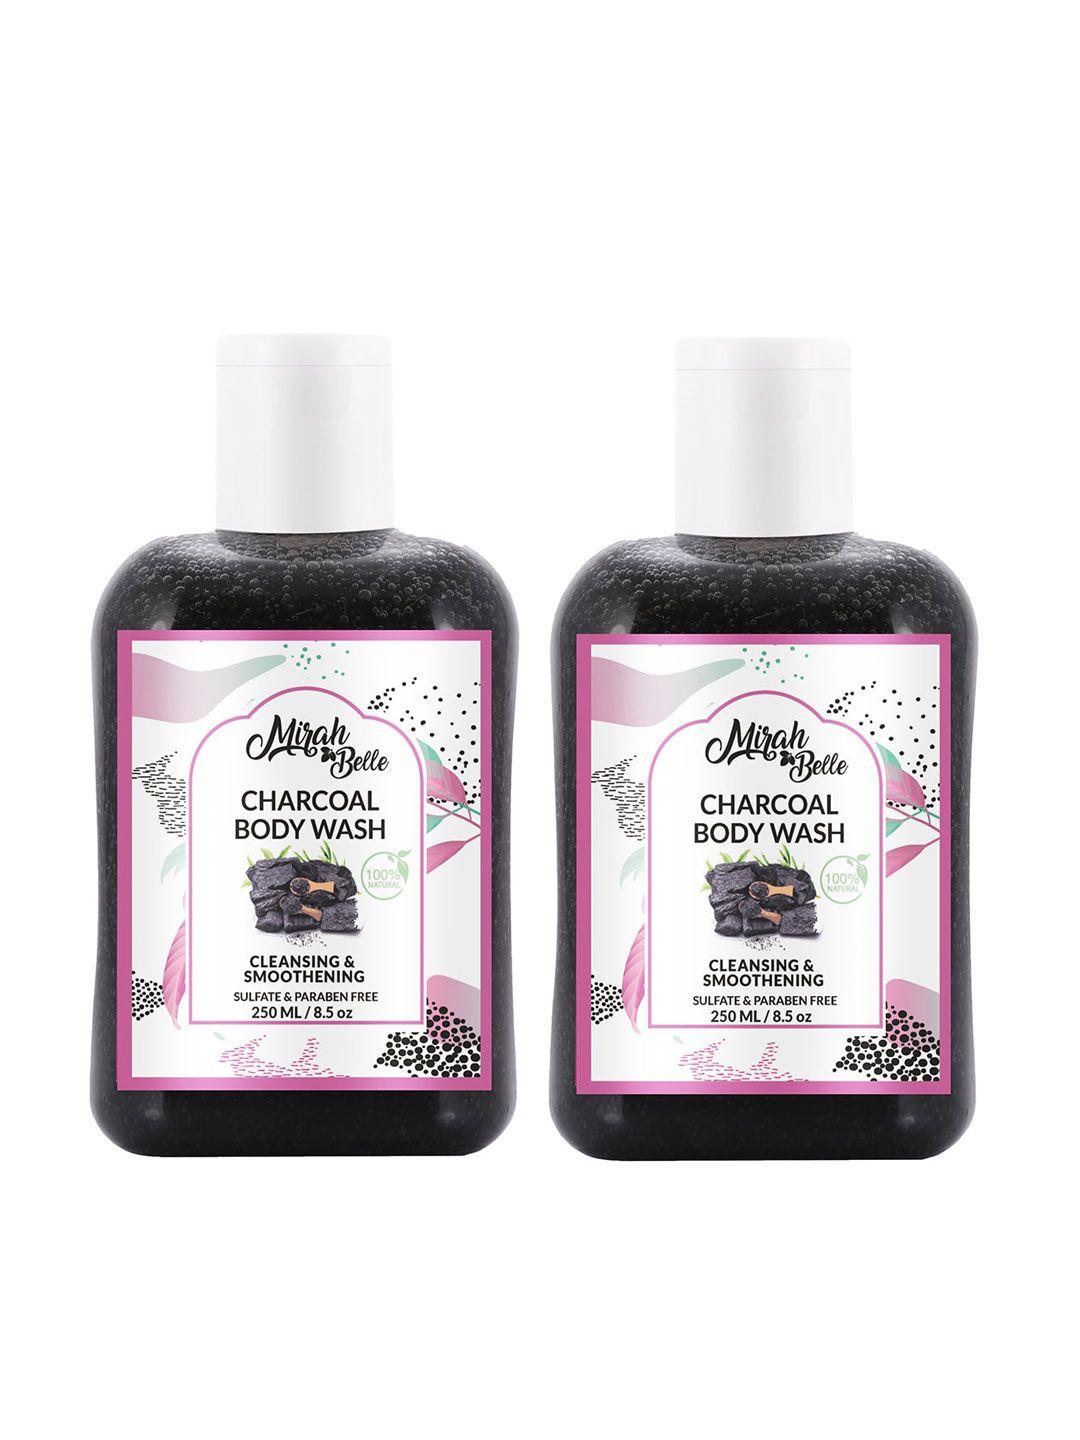 mirah belle pack of 2 activated charcoal natural body wash - 250 ml each